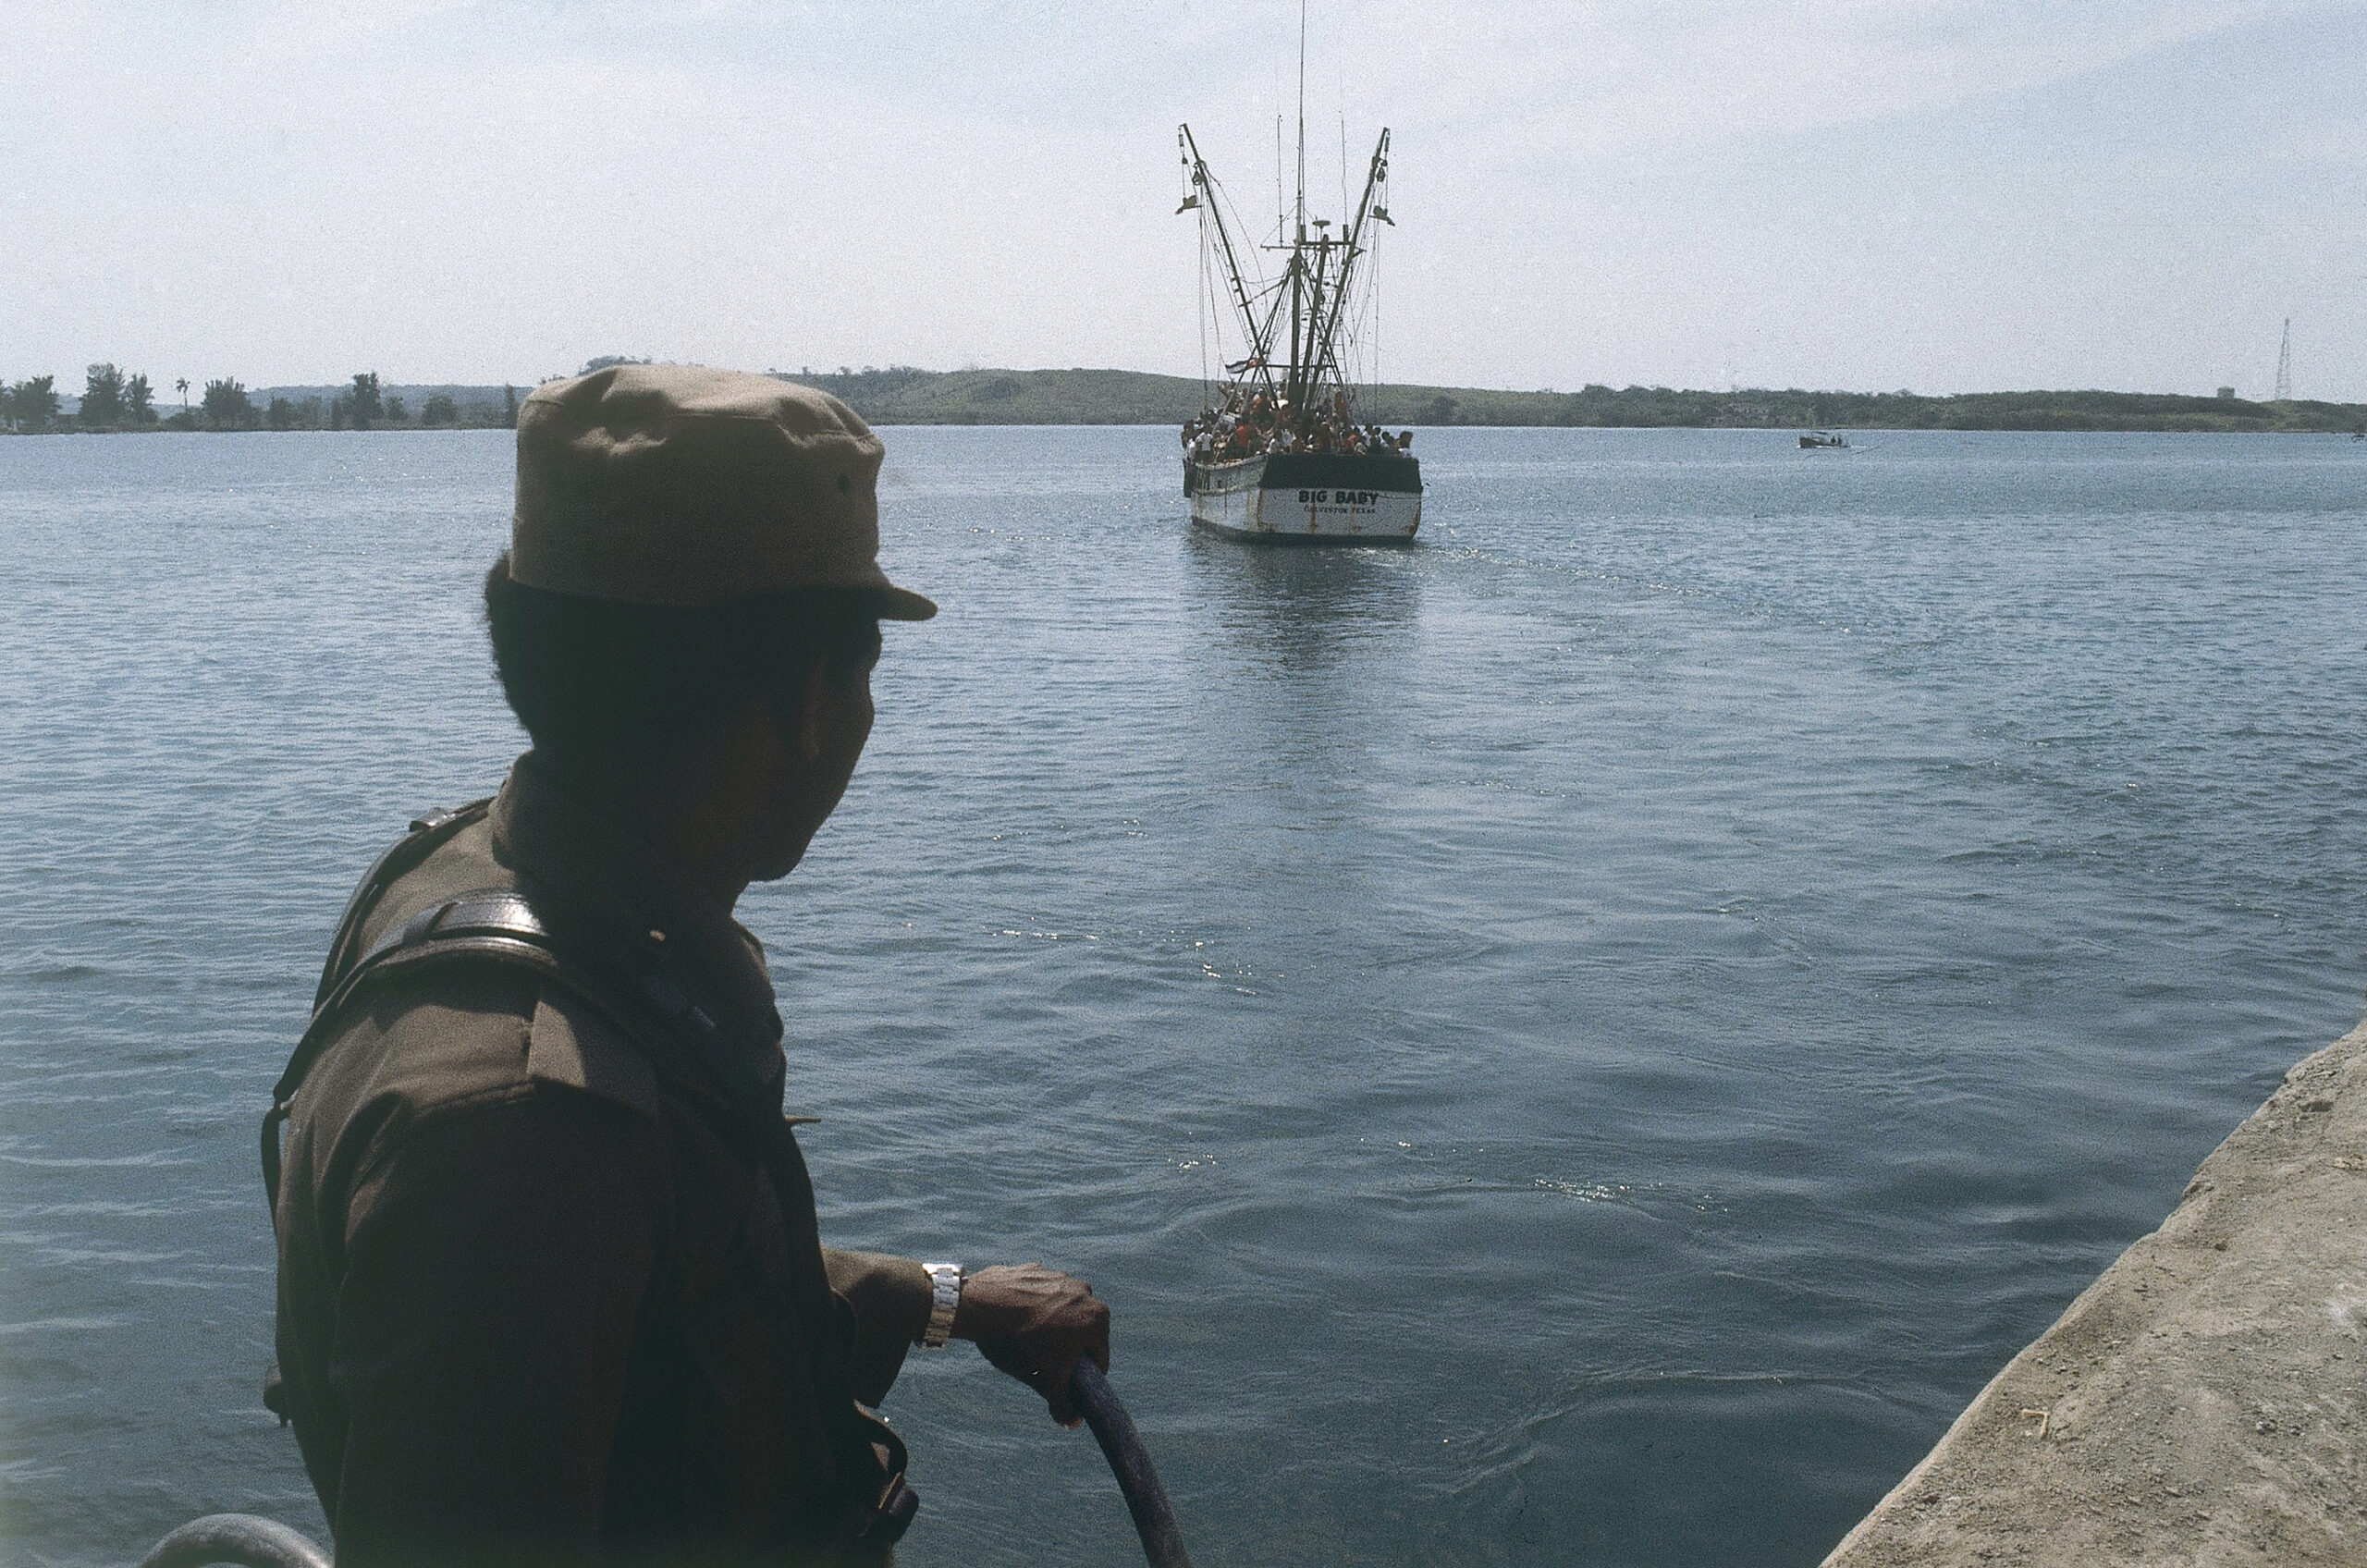 A Cuban soldier looks after a refugee ship at the small port of Mariel, Cuba in 1980 as refugees aboard sail for U.S.